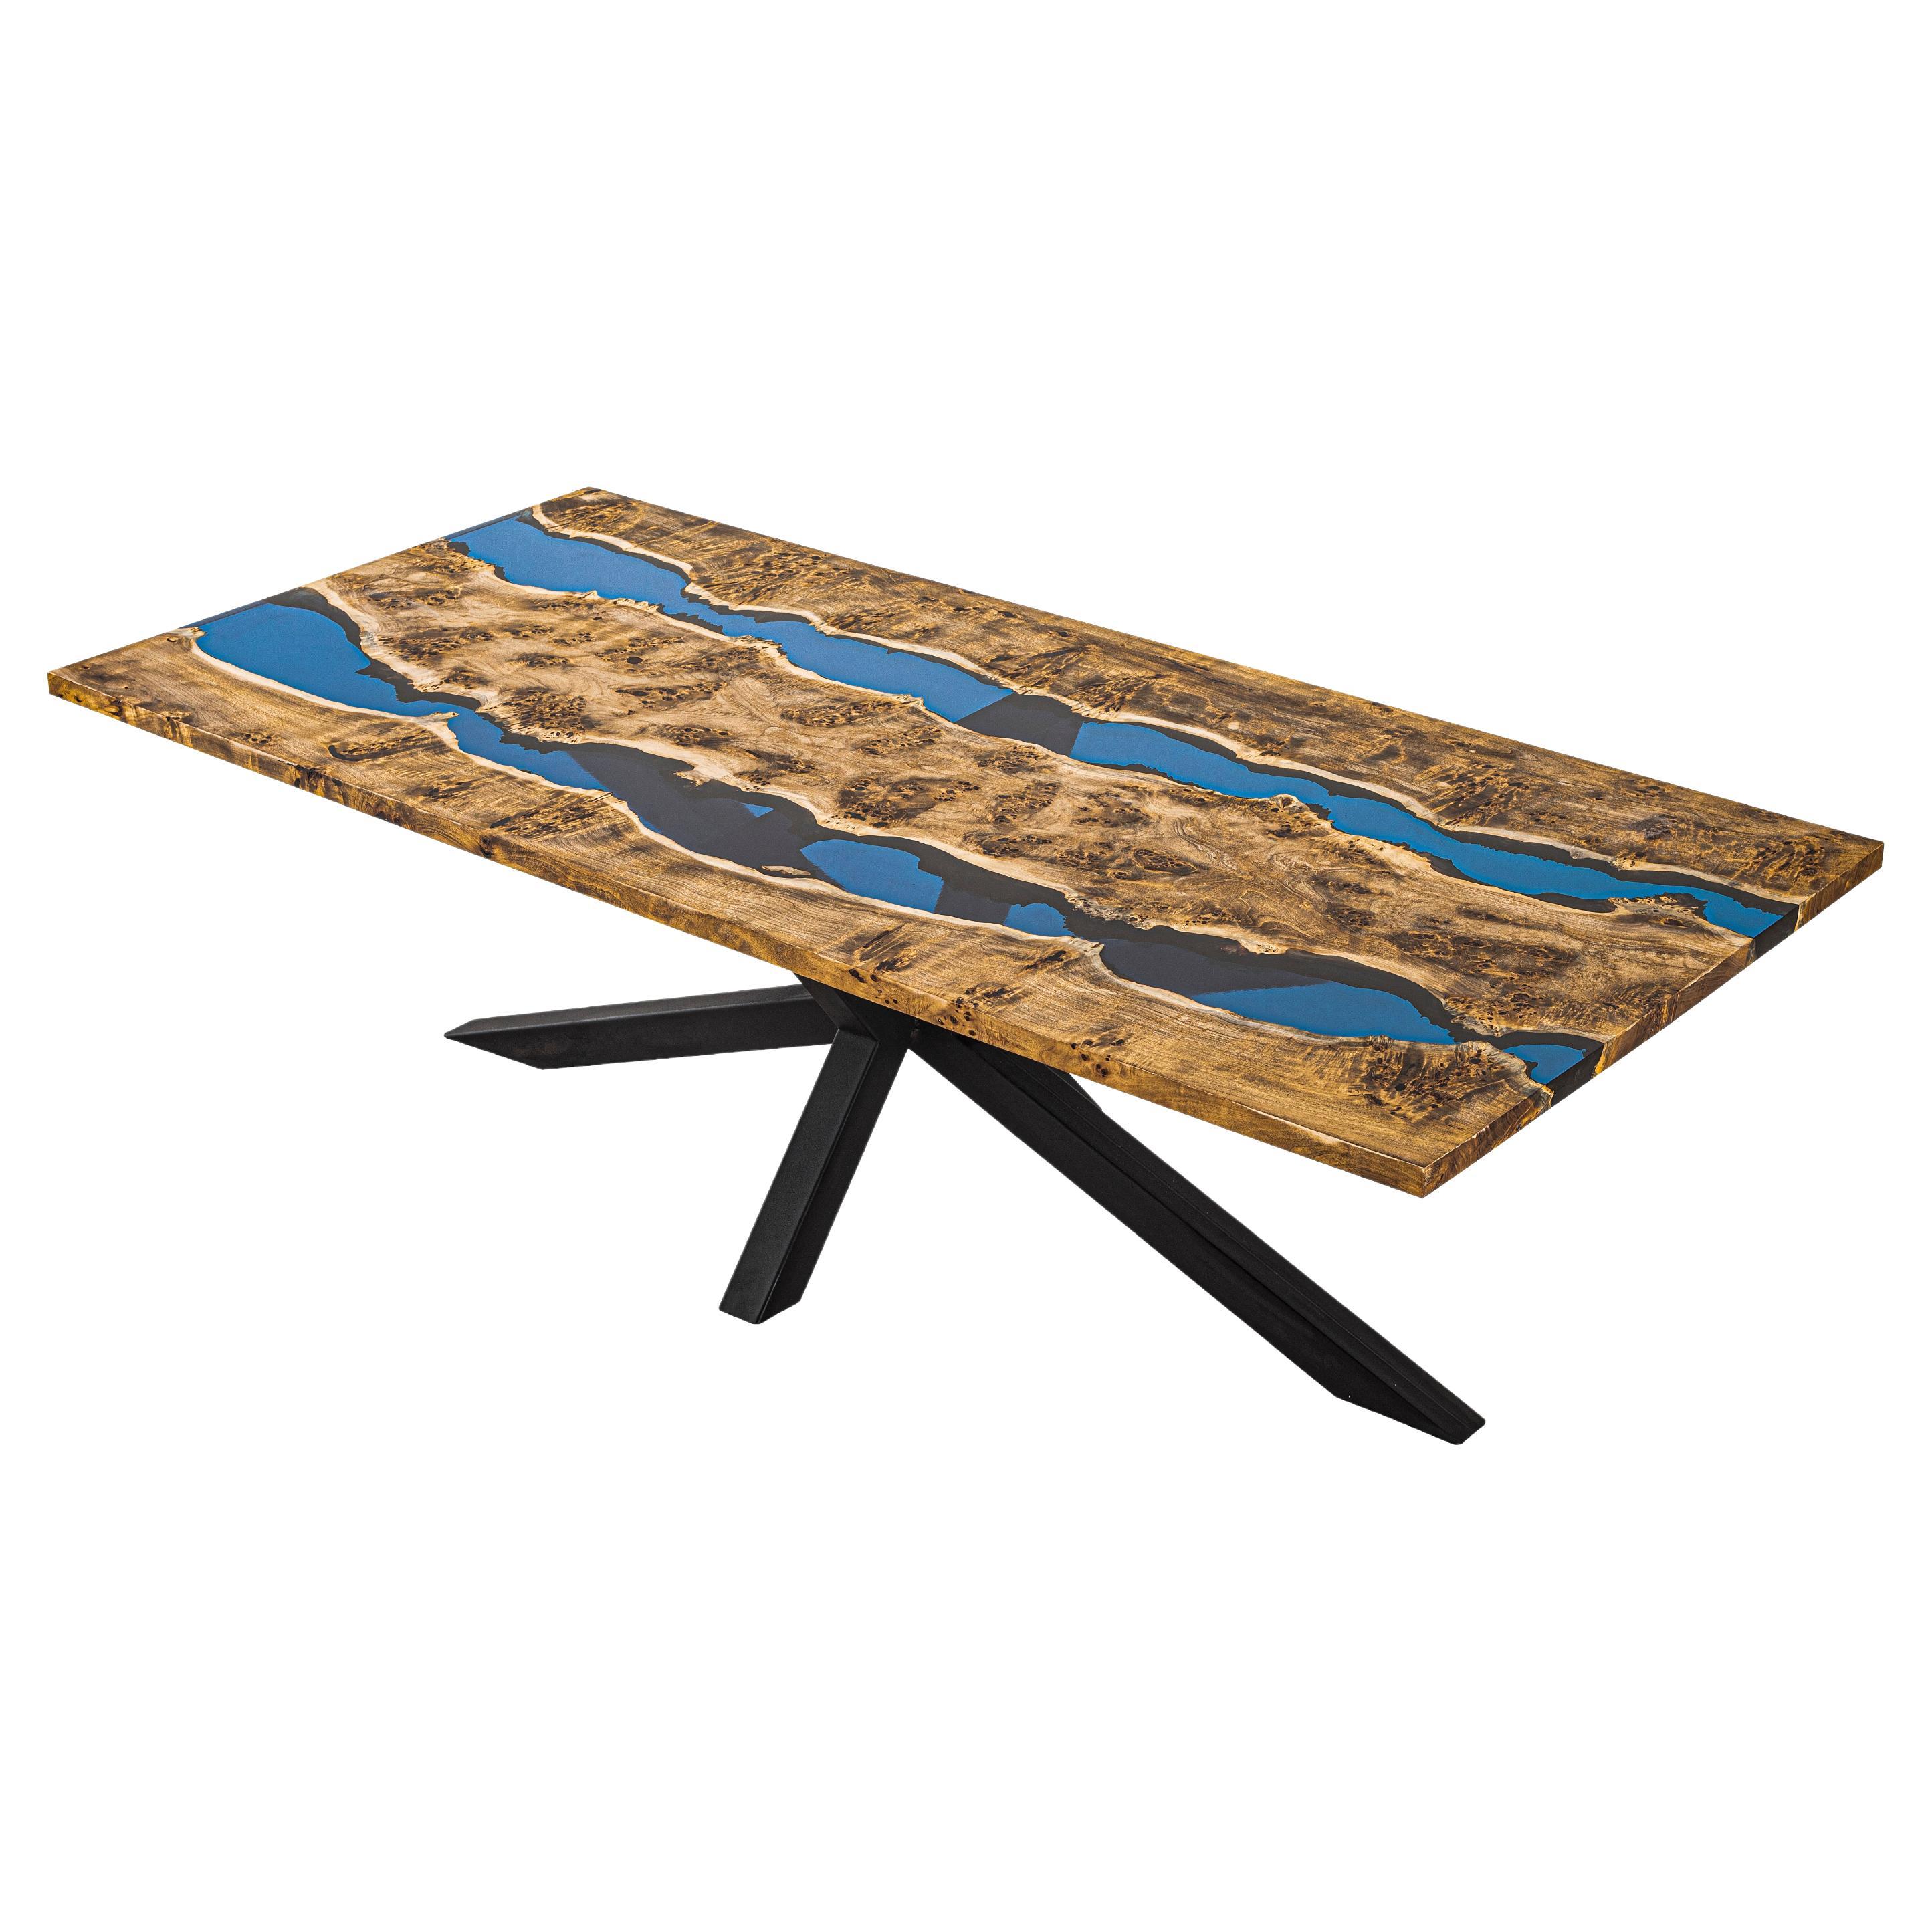 Mappa Burl Wood Blue Epoxy Resin Dining Table For Sale